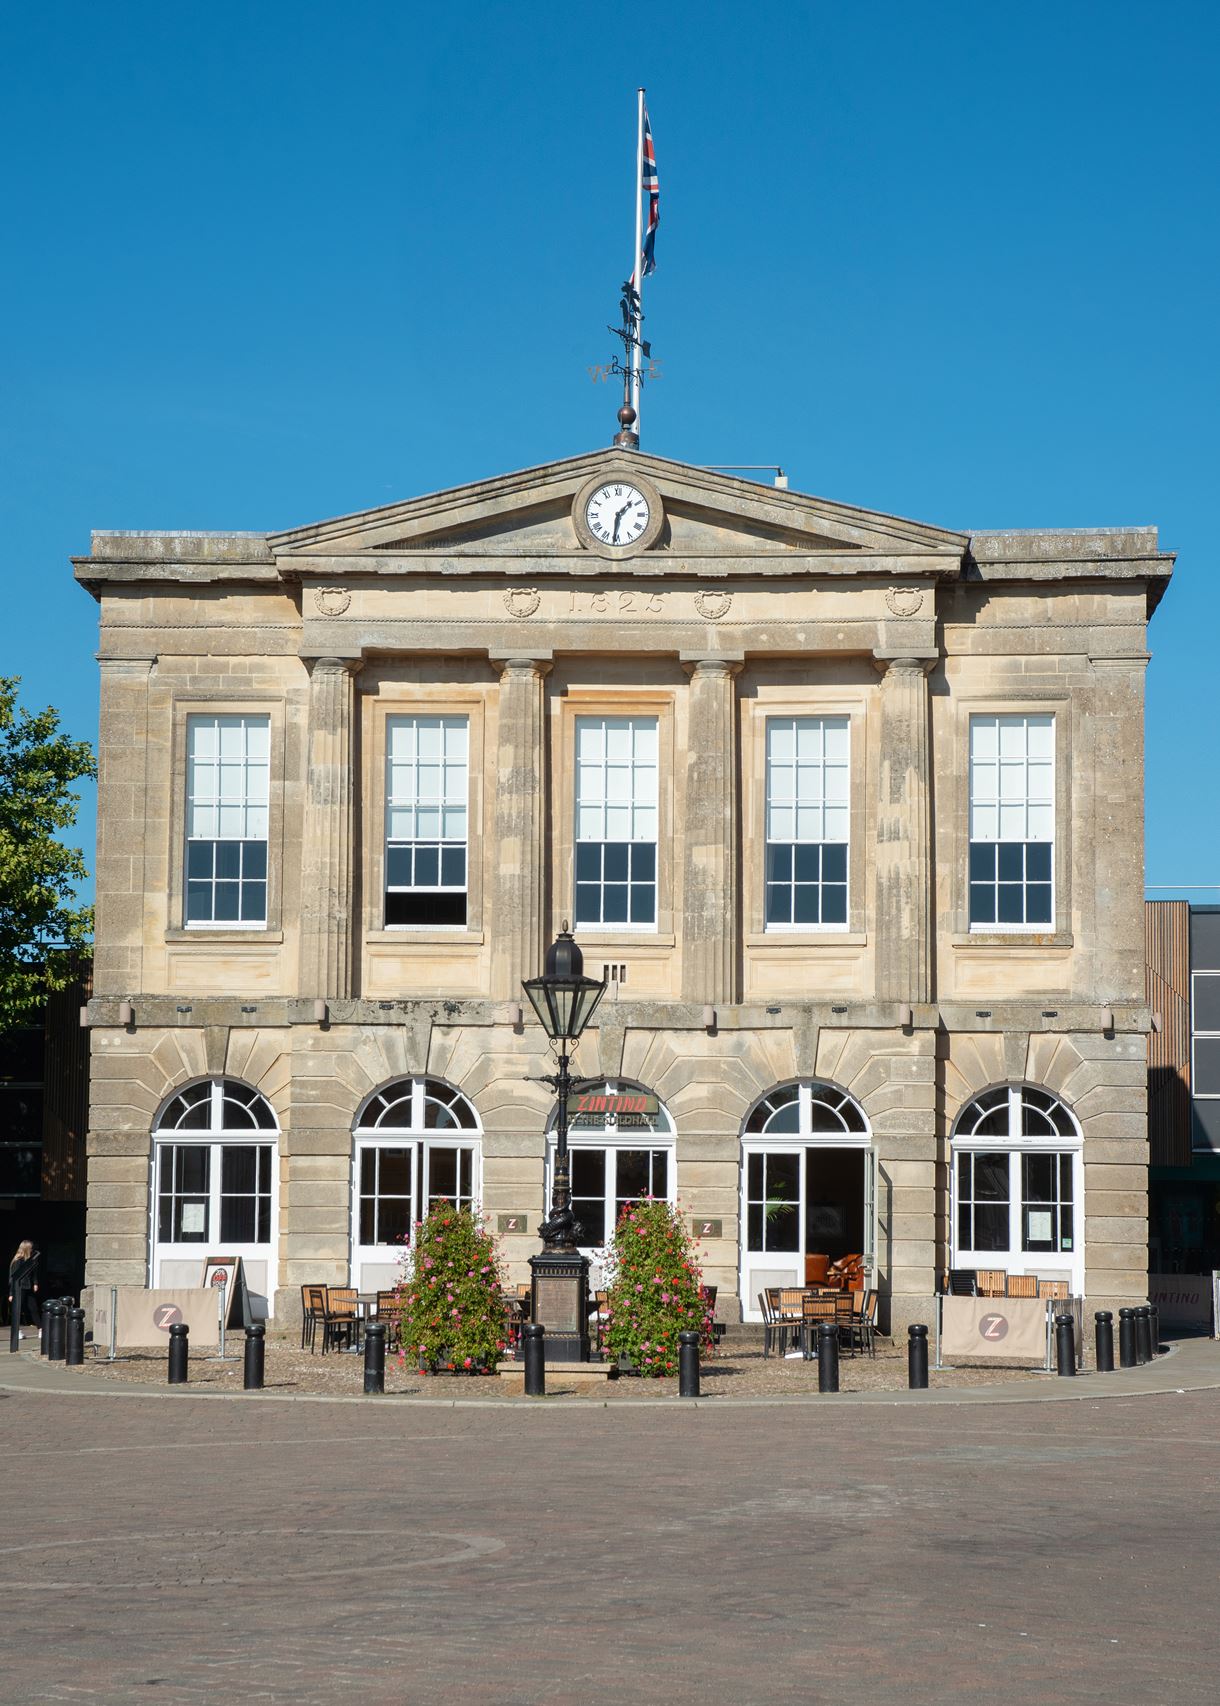 Andover's Guild hall